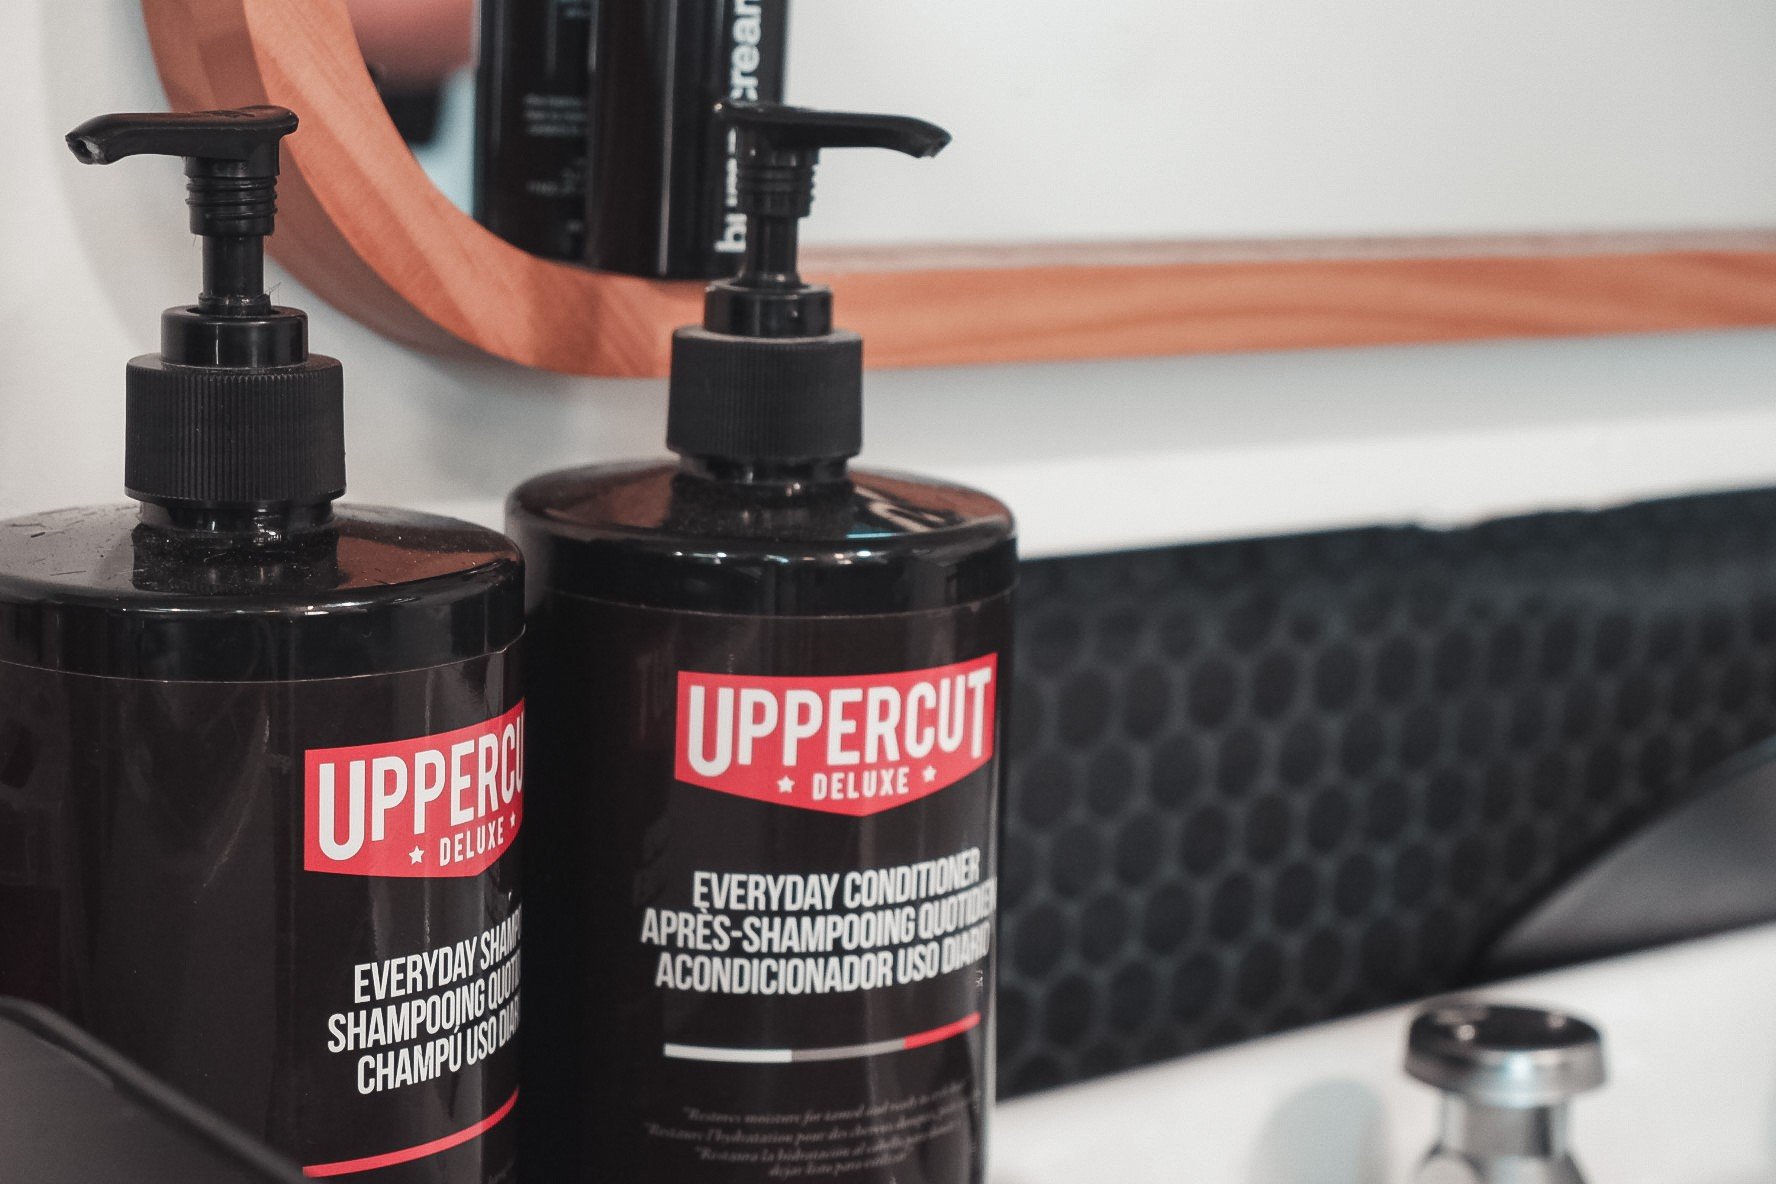 Uppercut Deluxe offers a blend of modern and traditional grooming products for men that work effectively on both your face and head. We highly recommend their shampoo and conditioner for beard care.

#uppercutdelux #beardcaretips #groomandzoom